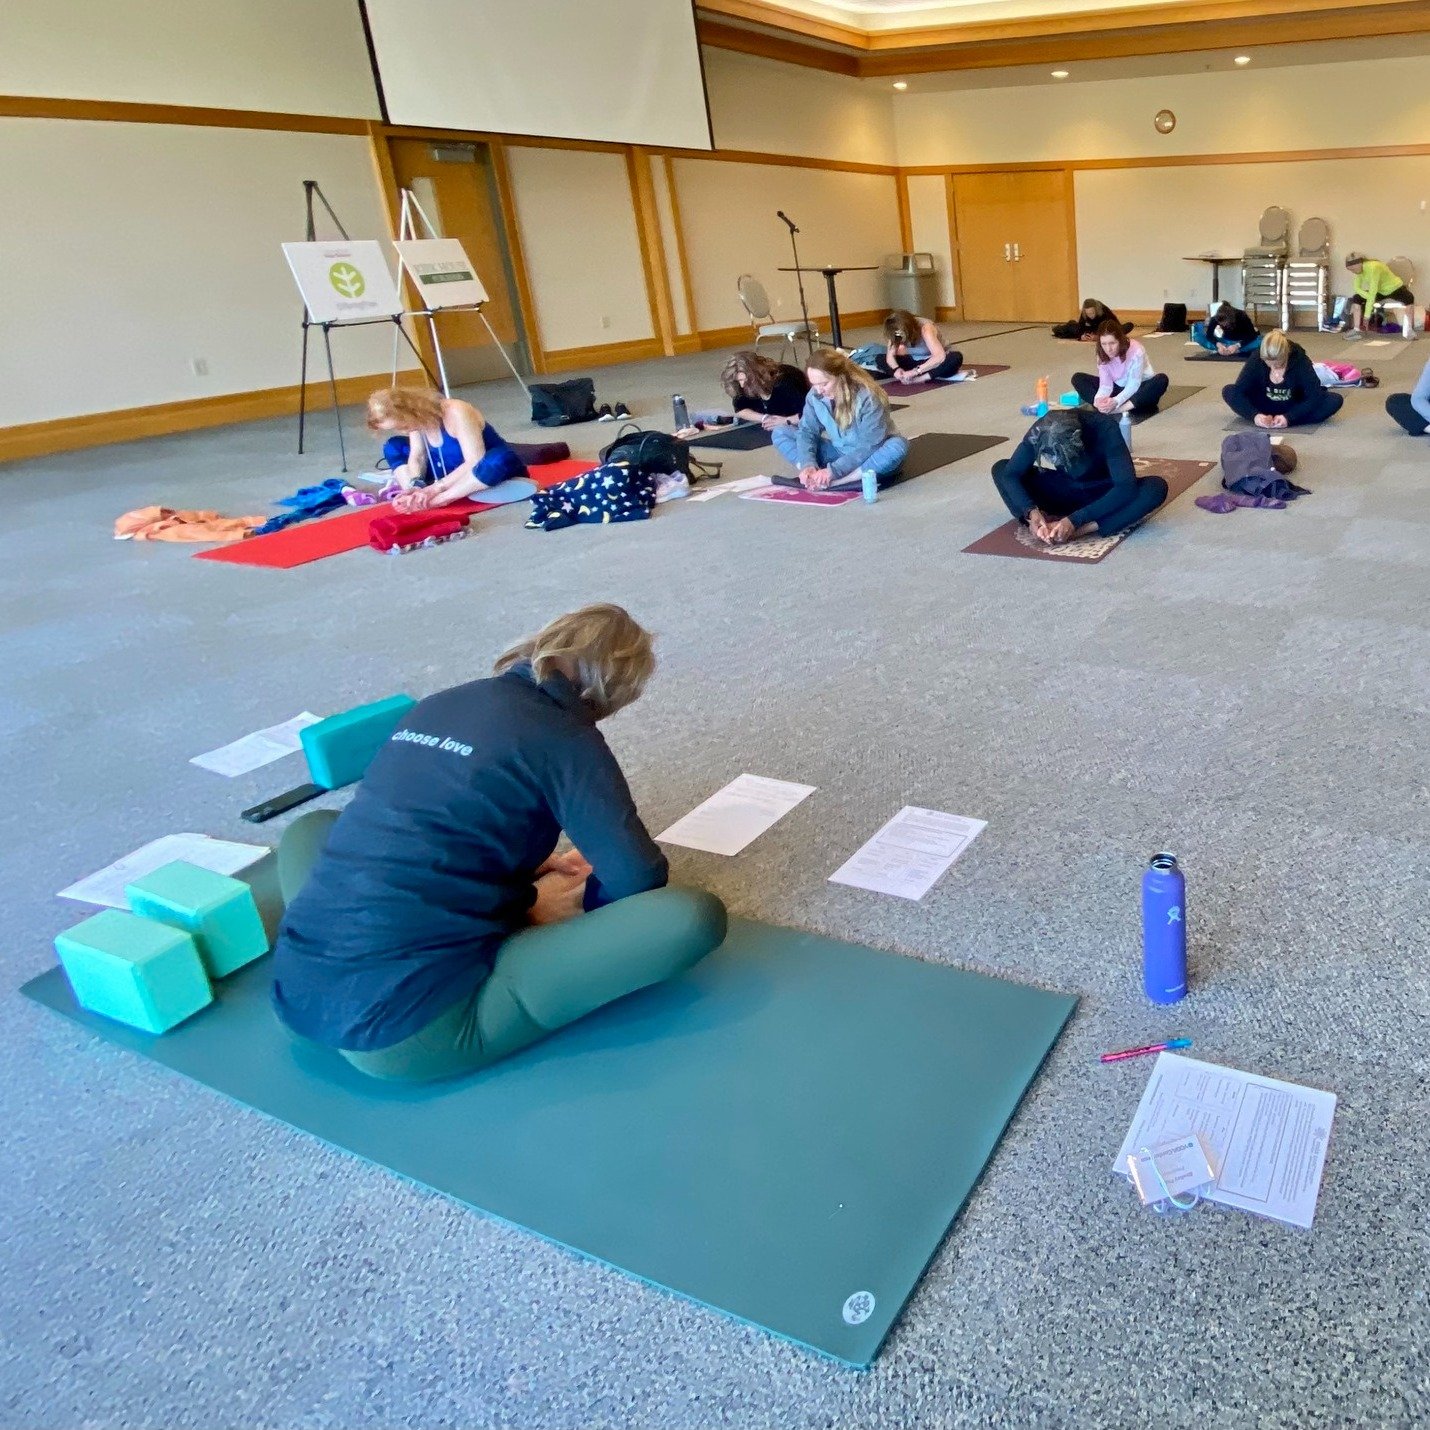 How wonderful it was to be with such intelligent and kind colleagues at the recent MN Yoga conference learning and teaching in such a strong yoga community. There is so much wonderful yoga happening in Minnesota! Thankful to have been a part!

#Thank